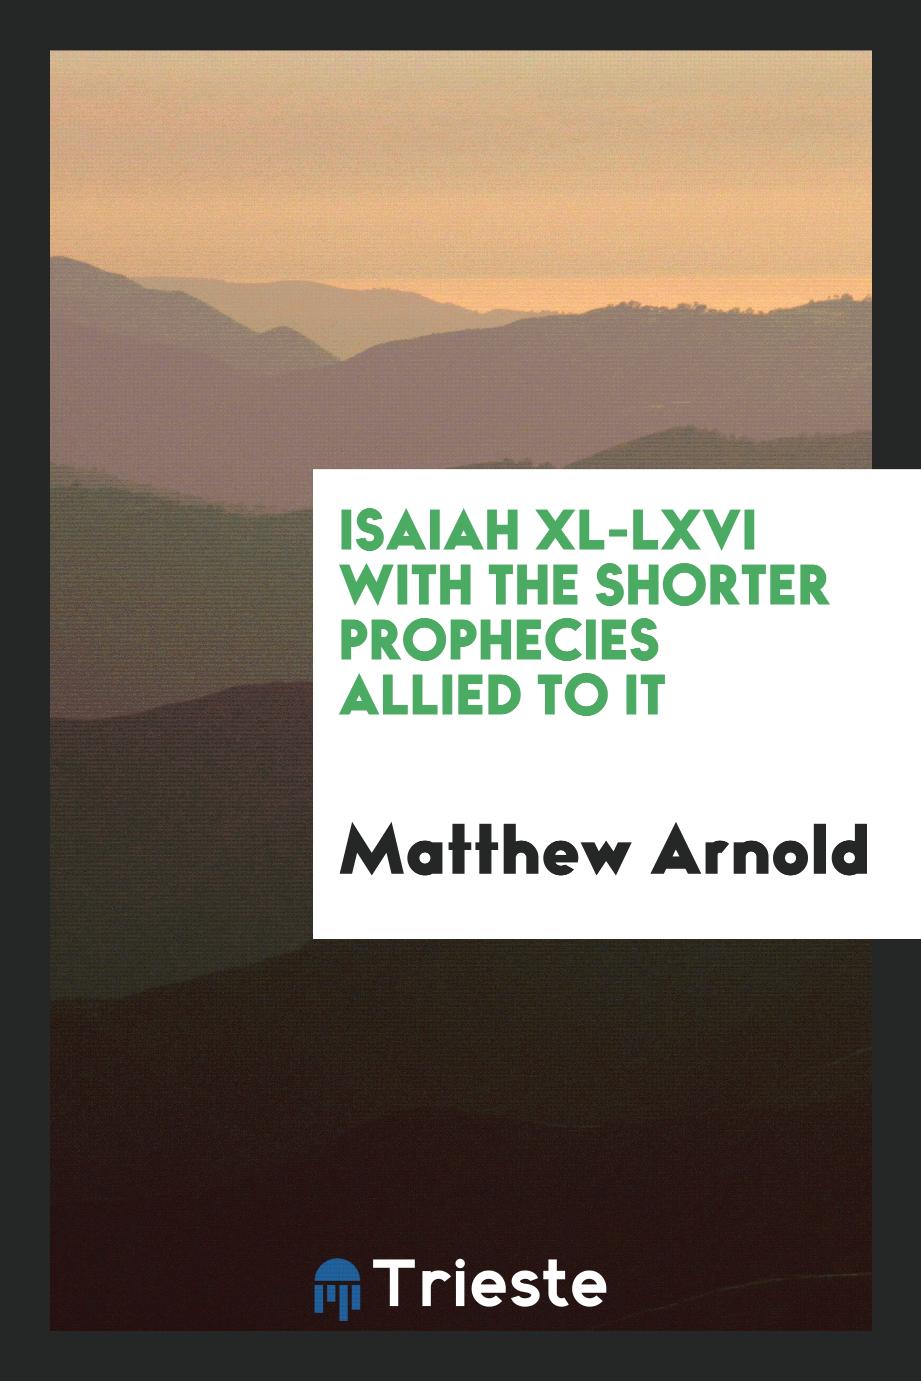 Isaiah Xl-LXVI with the Shorter Prophecies Allied to It